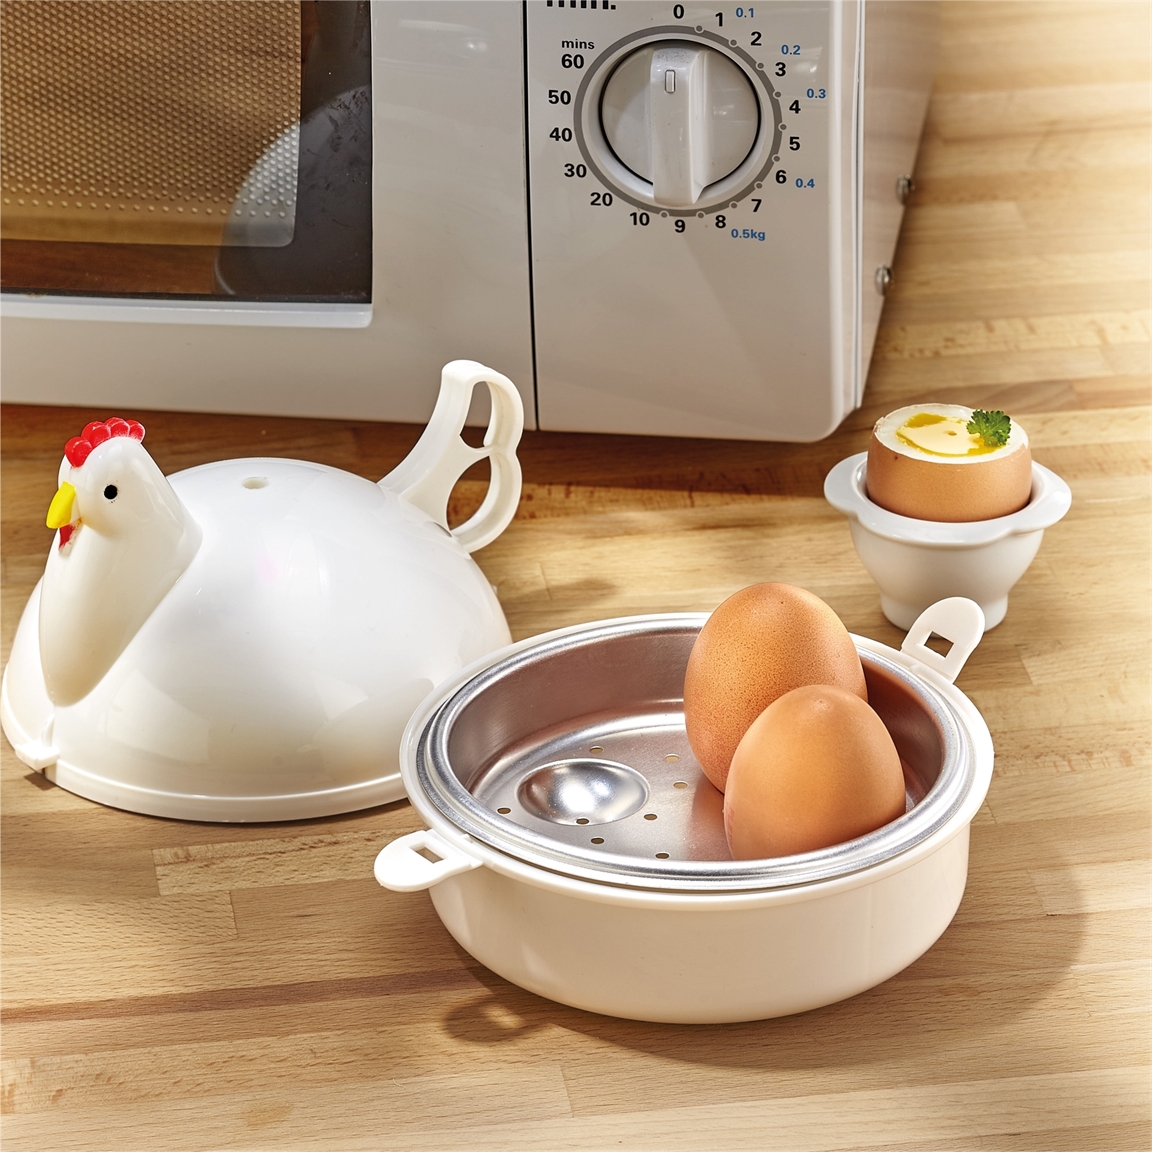 Cuit oeuf Micro Onde Cuiseur à oeufs Egg Boiler Cooker Microwave